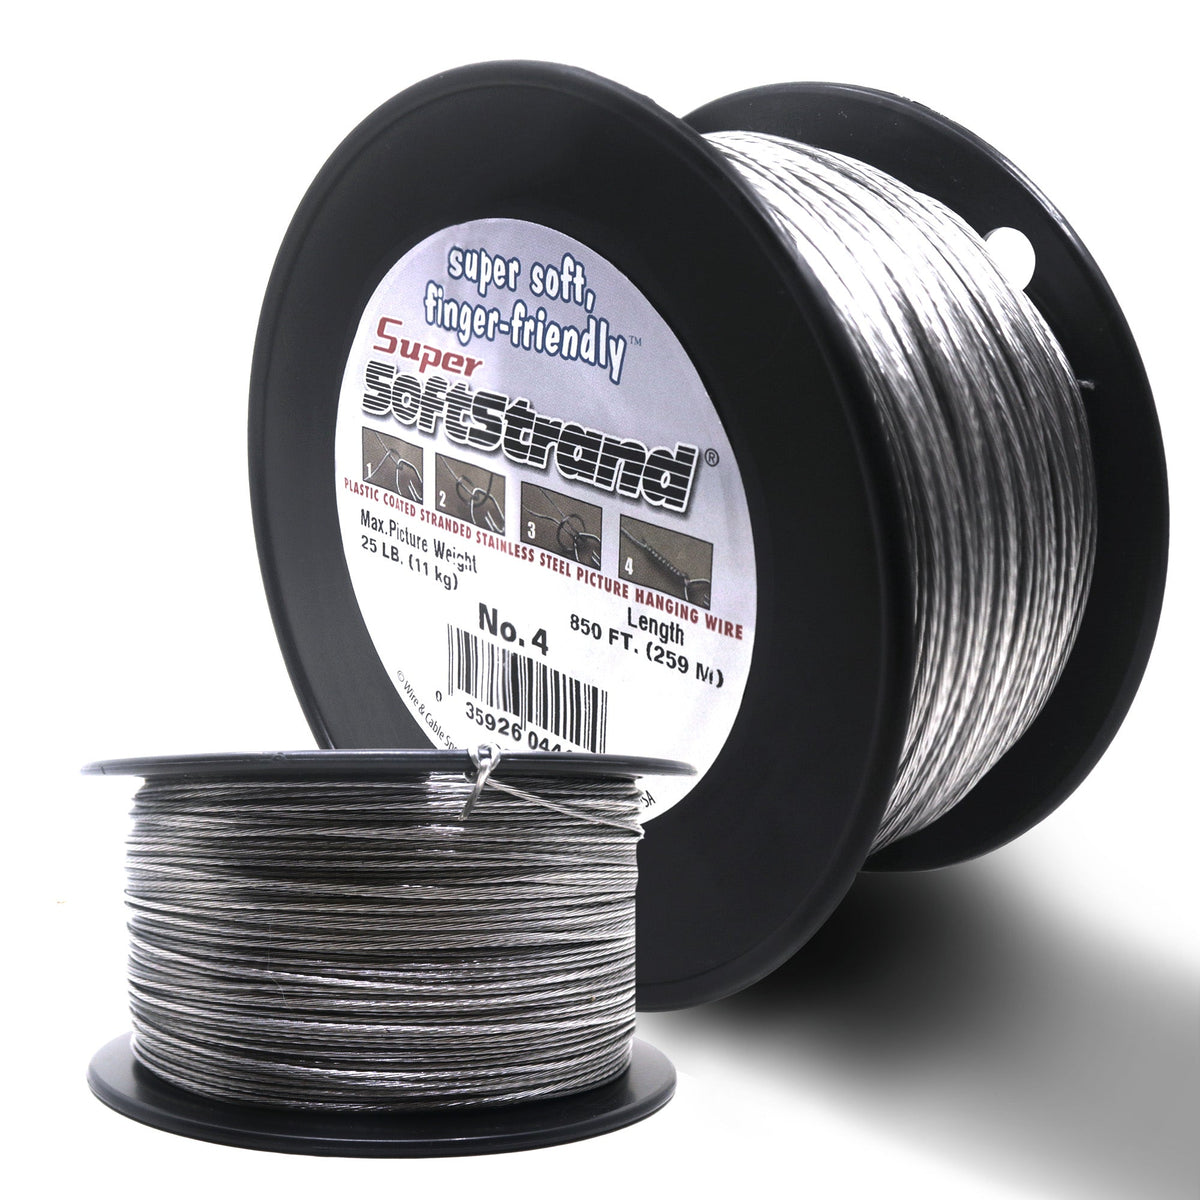 No. 4 Vinyl Coated Stainless Wire 850ft - BOX-6401 - Picture Hang Solutions